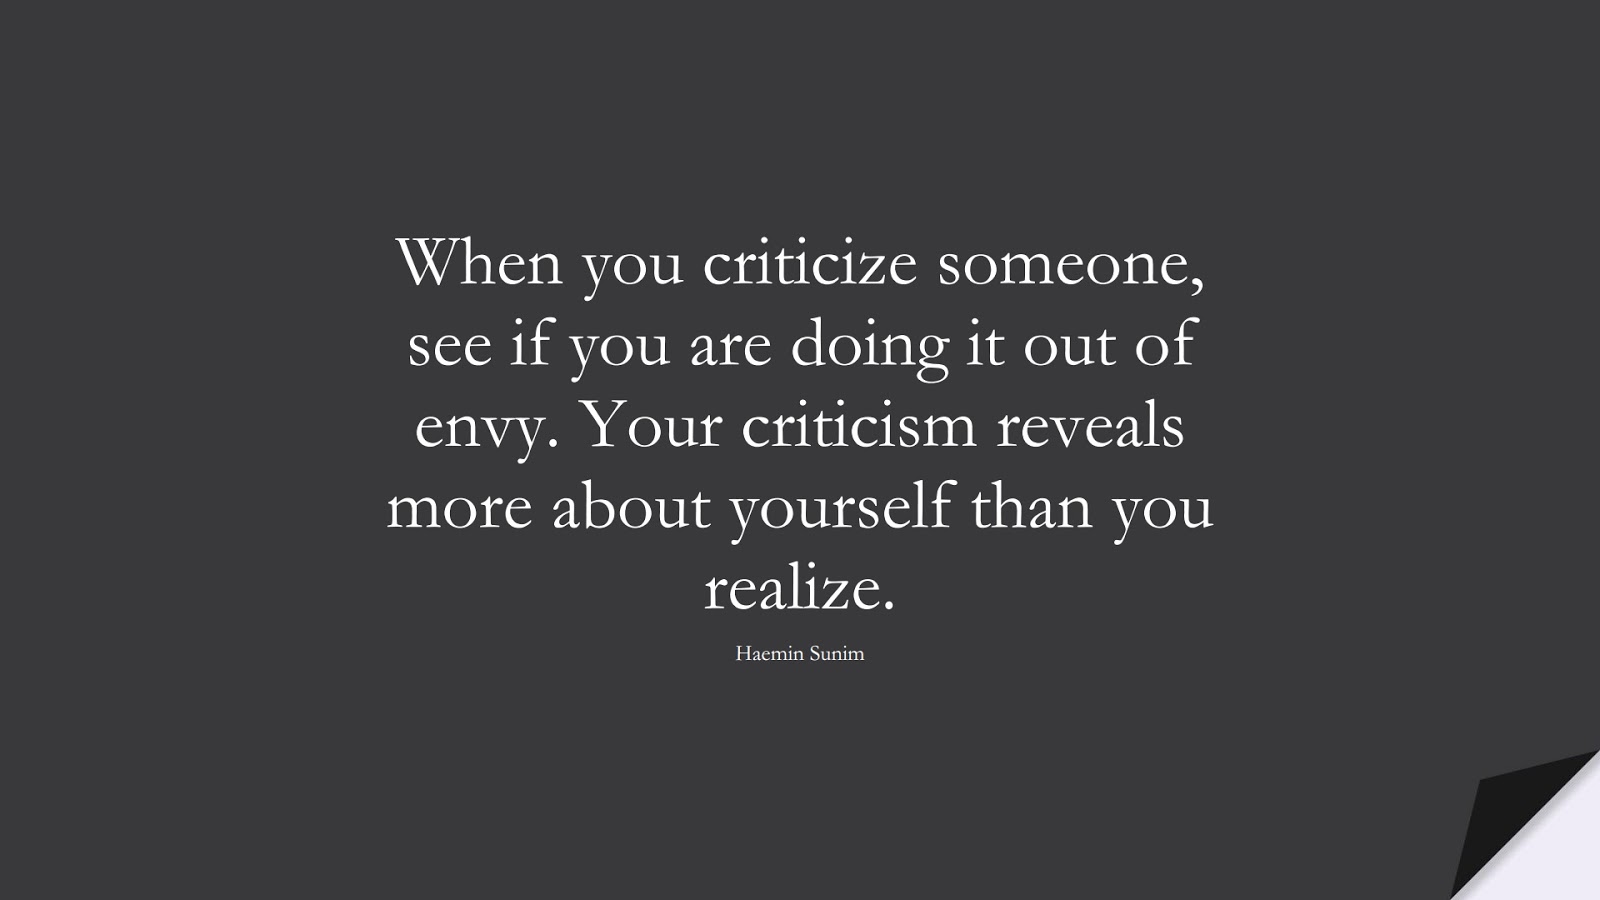 When you criticize someone, see if you are doing it out of envy. Your criticism reveals more about yourself than you realize. (Haemin Sunim);  #RelationshipQuotes